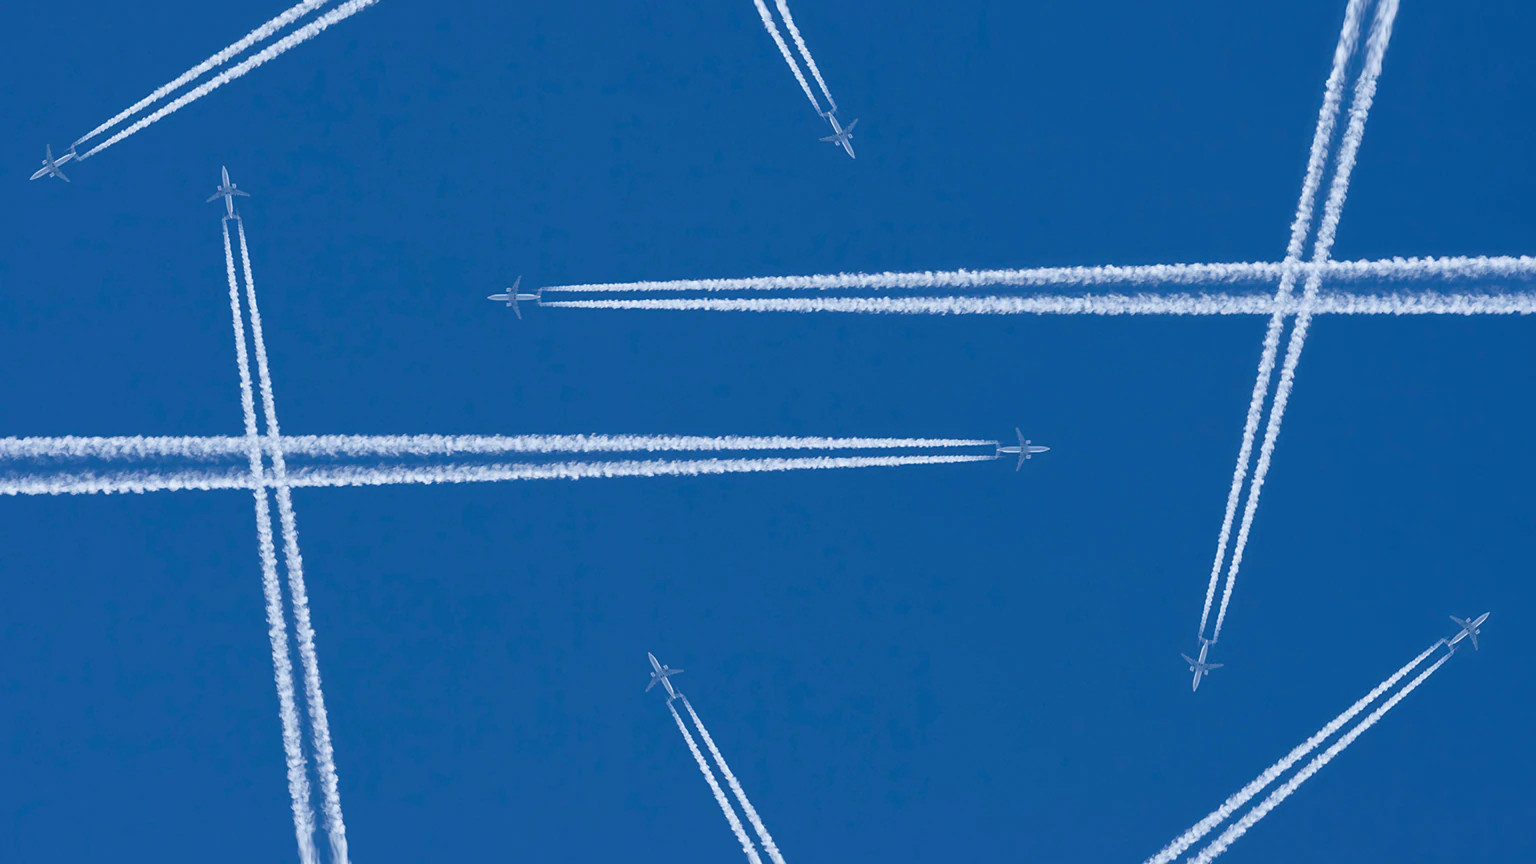 Contrails (by McKinsey in the linked article)